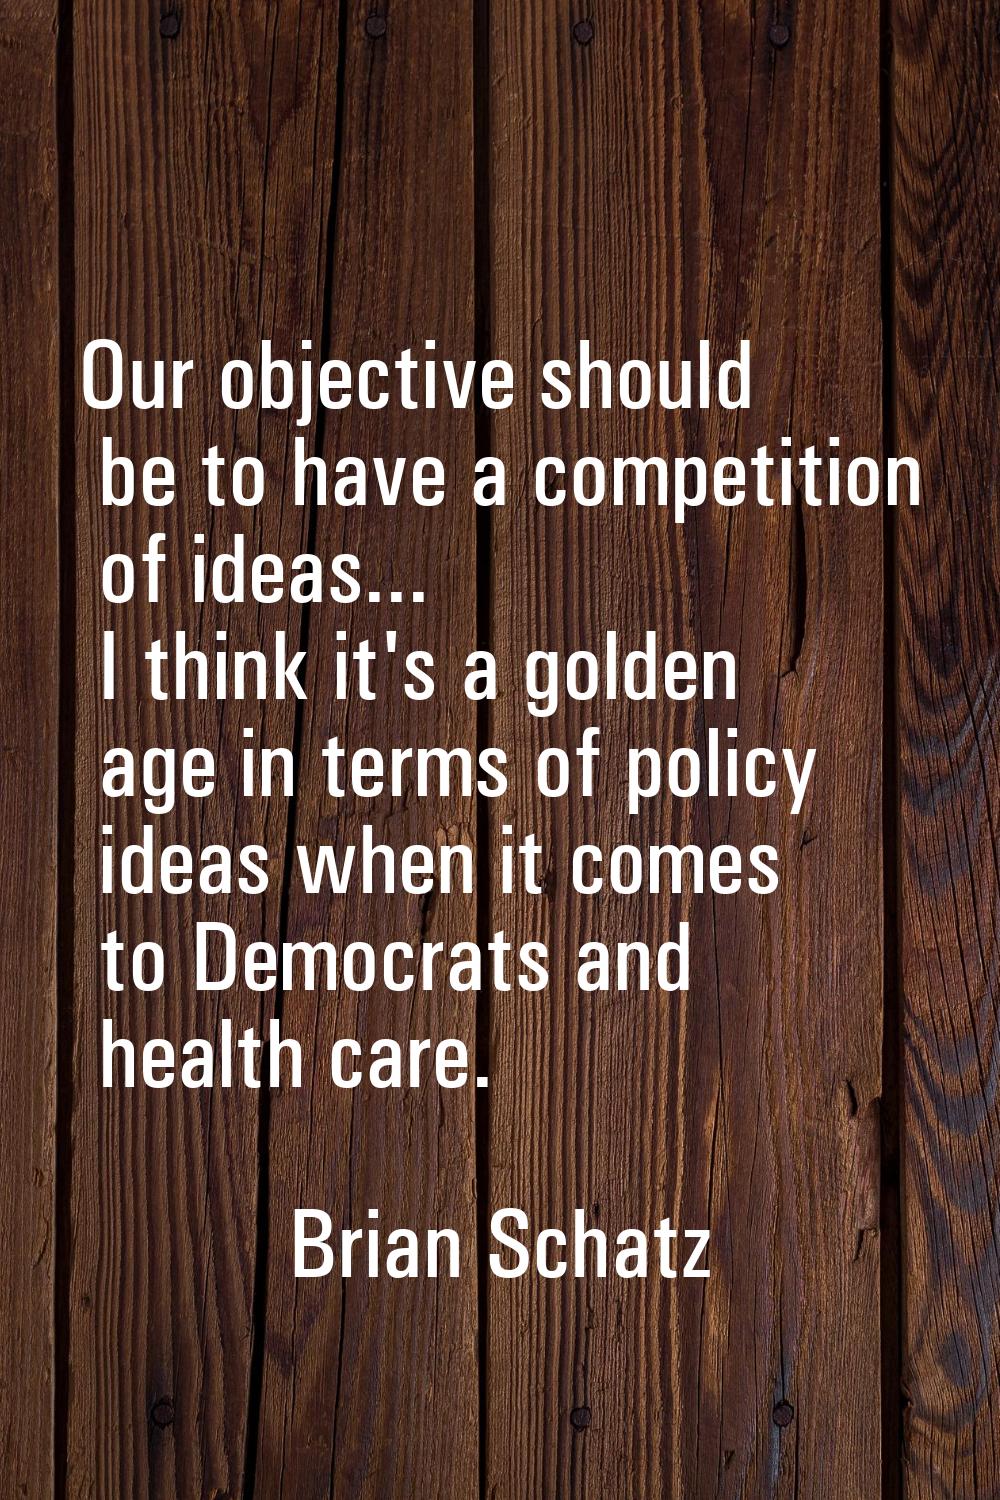 Our objective should be to have a competition of ideas... I think it's a golden age in terms of pol